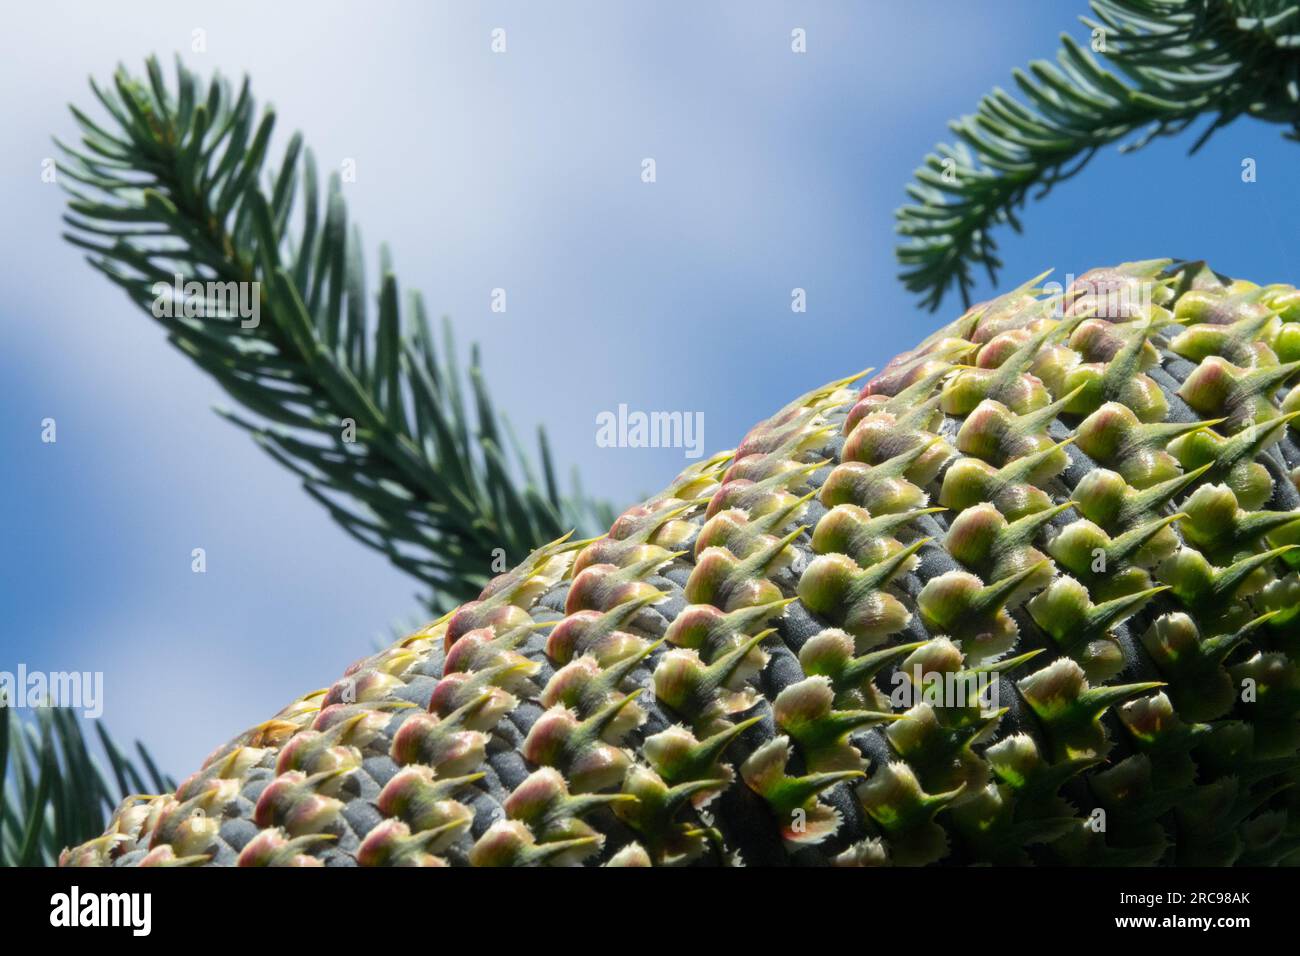 Abies cone texture surface close up Noble fir, Abies procera Stock Photo